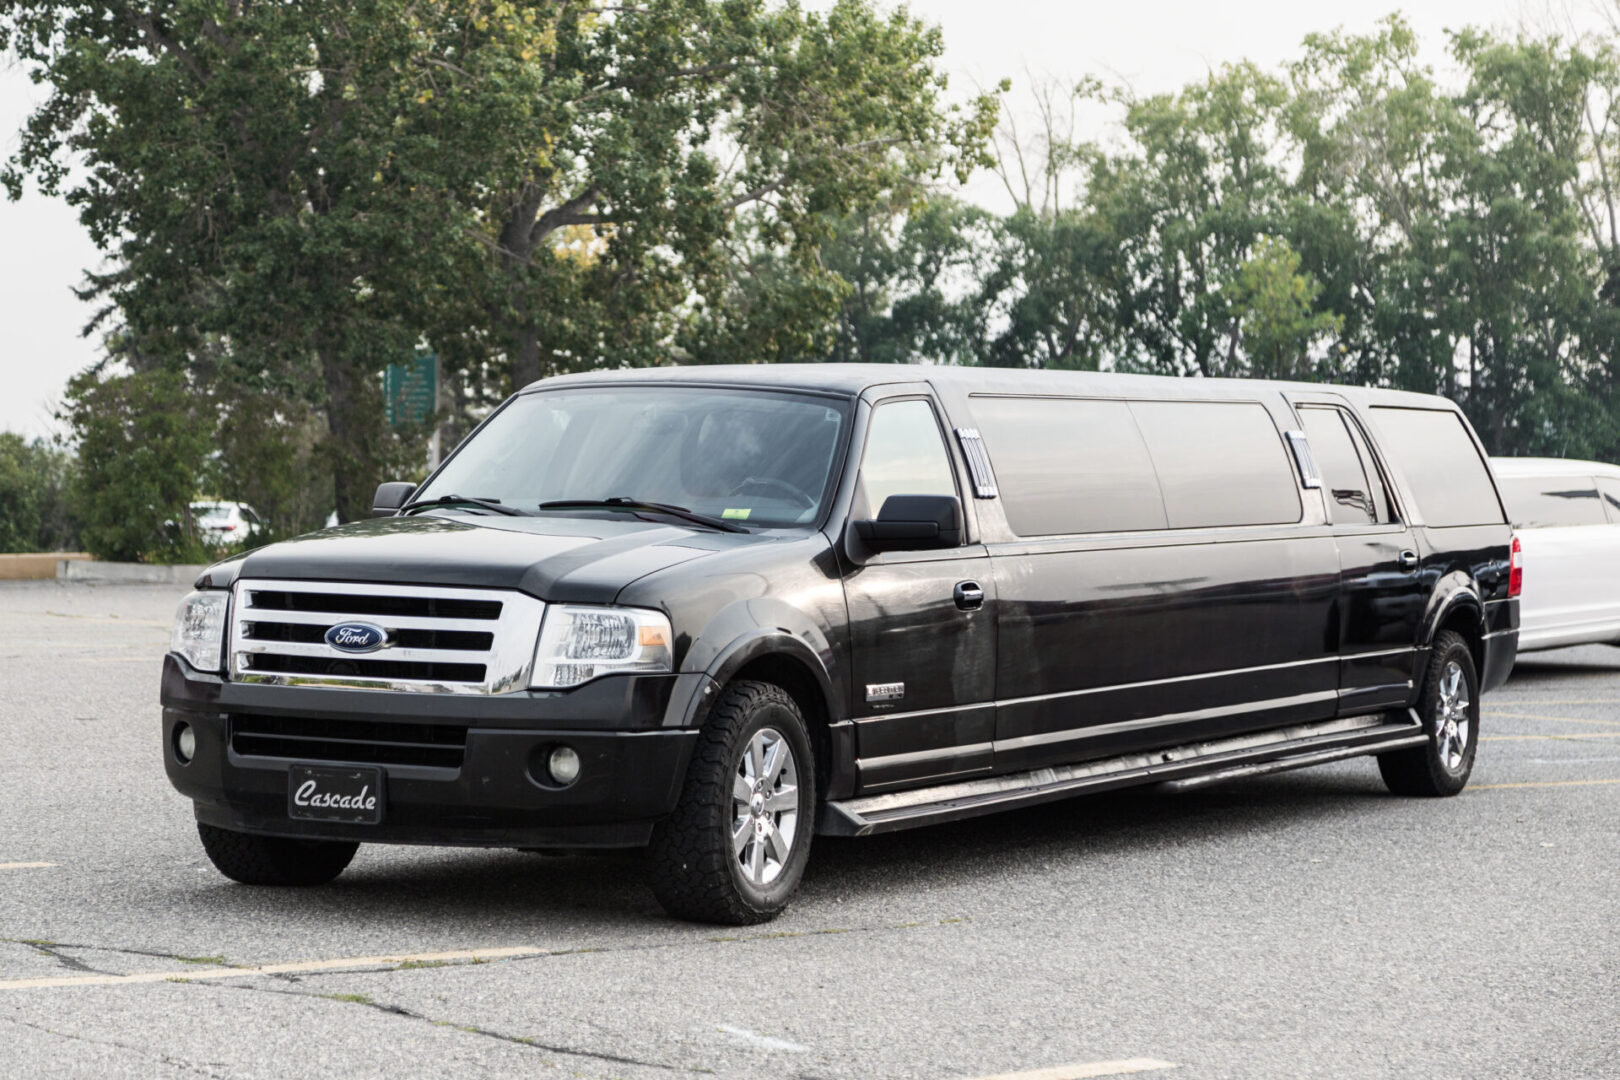 A black ford limousine parked with trees in the background